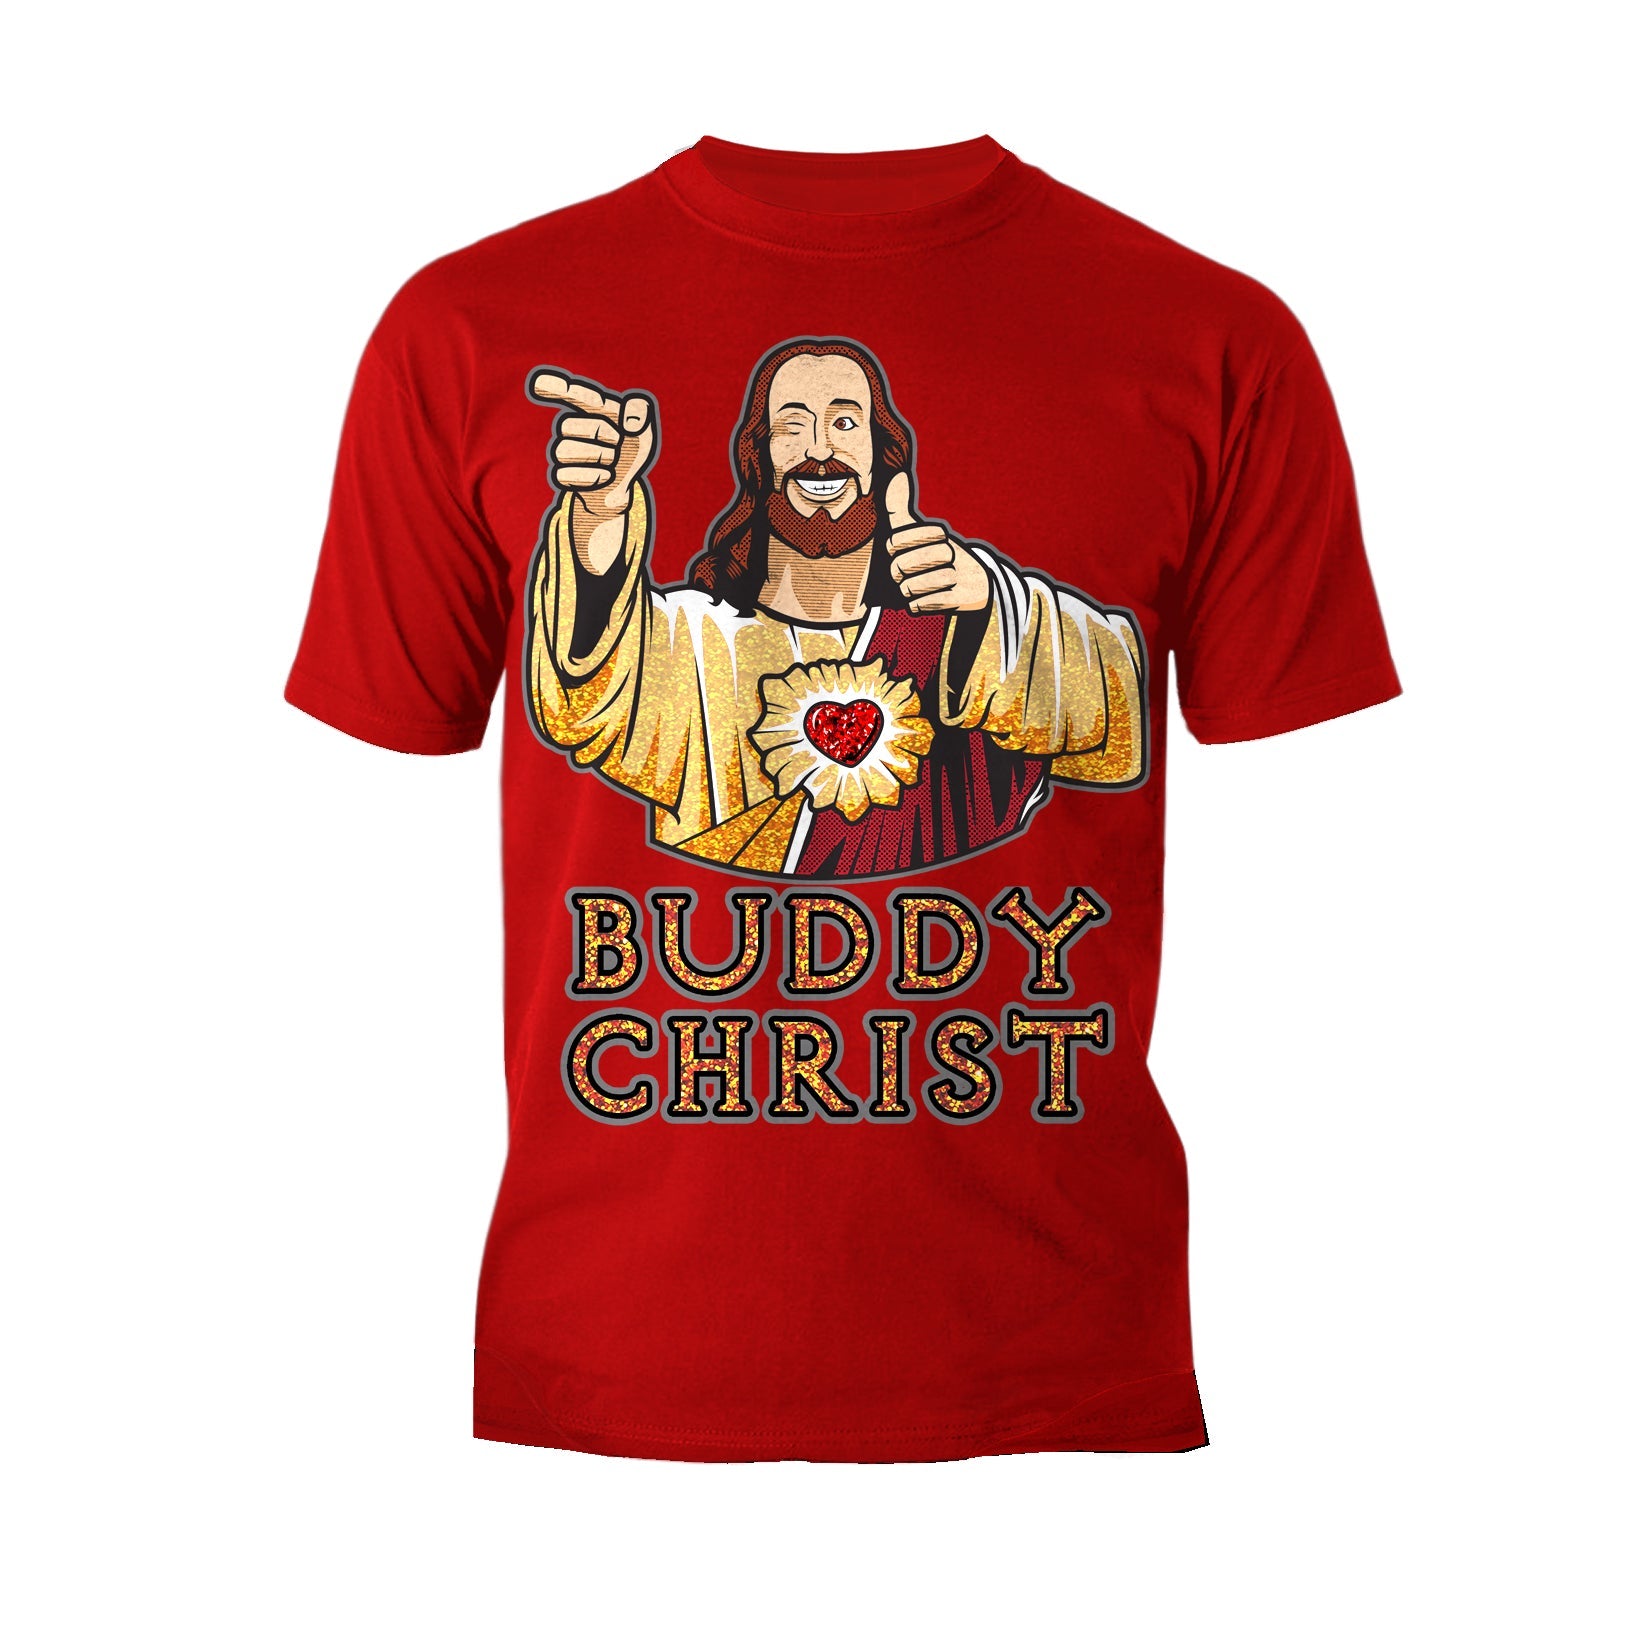 Kevin Smith View Askewniverse Buddy Christ Got Golden Wow Edition Official Men's T-Shirt